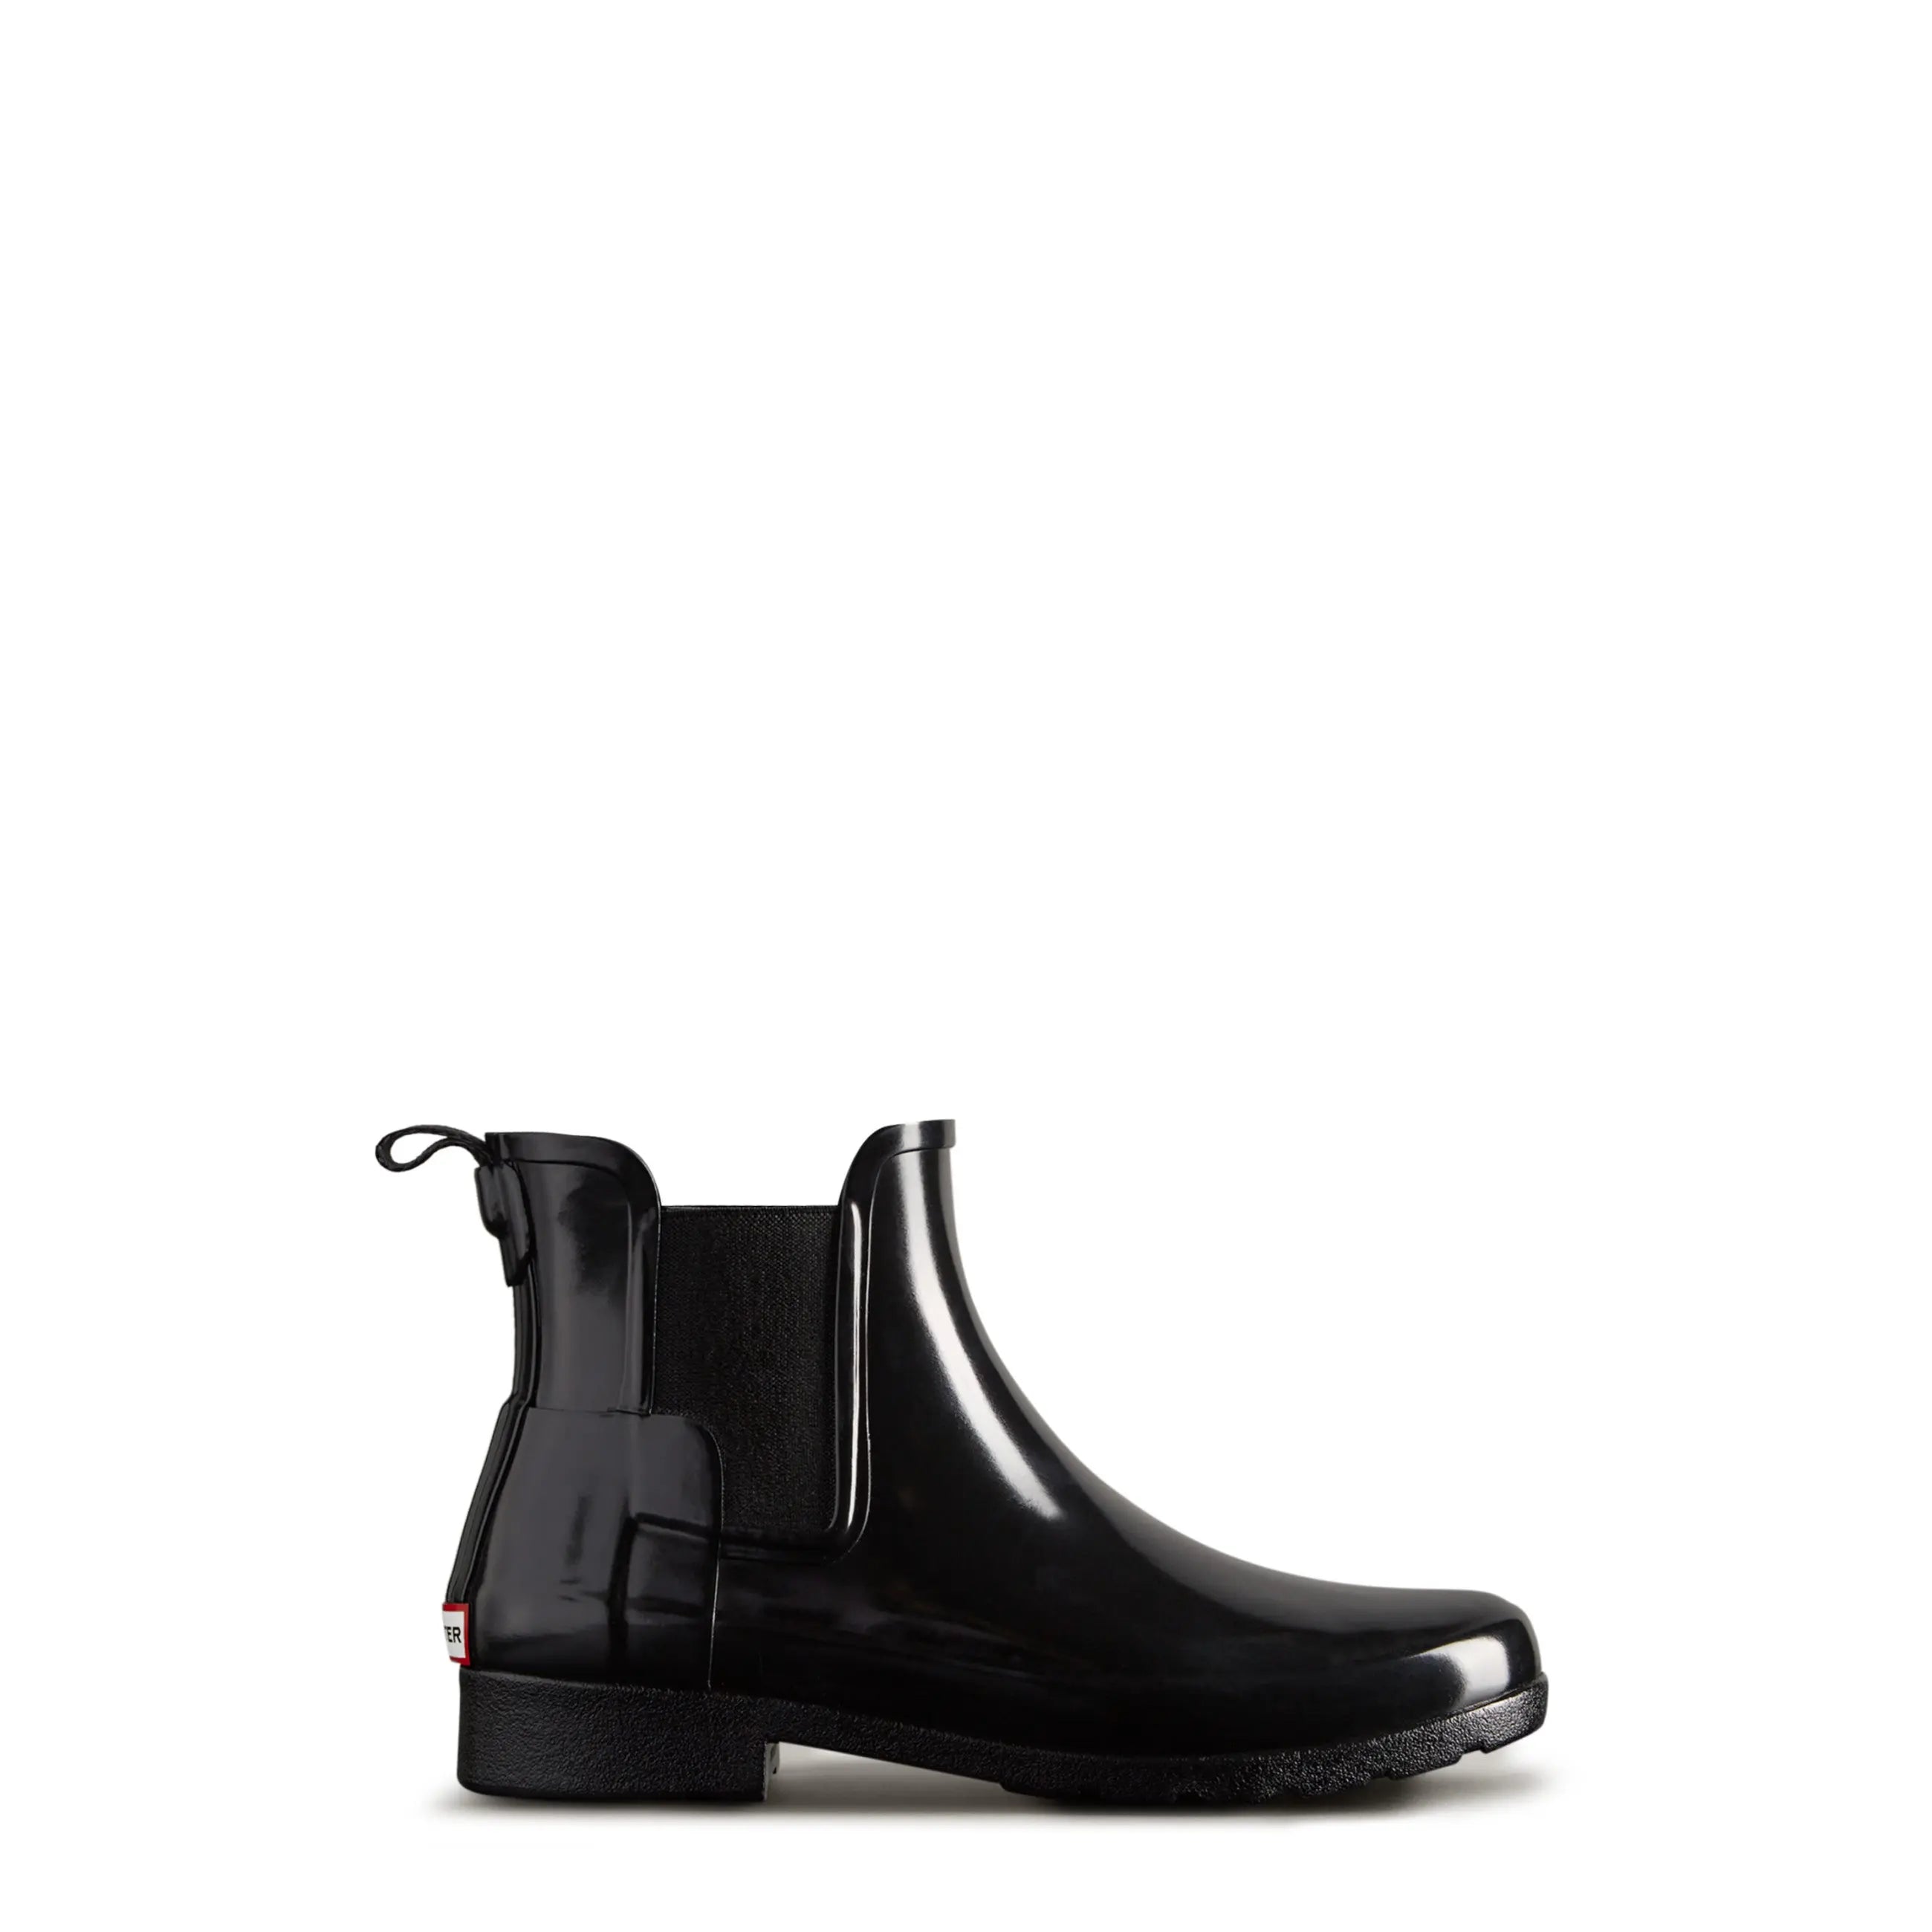 Women's Refined Slim Fit Gloss Chelsea Boots - Hunter Boots Women's Refined Slim Fit Gloss Chelsea Boots Black Hunter Boots Women's > Ankle Boots > Chelsea Boots